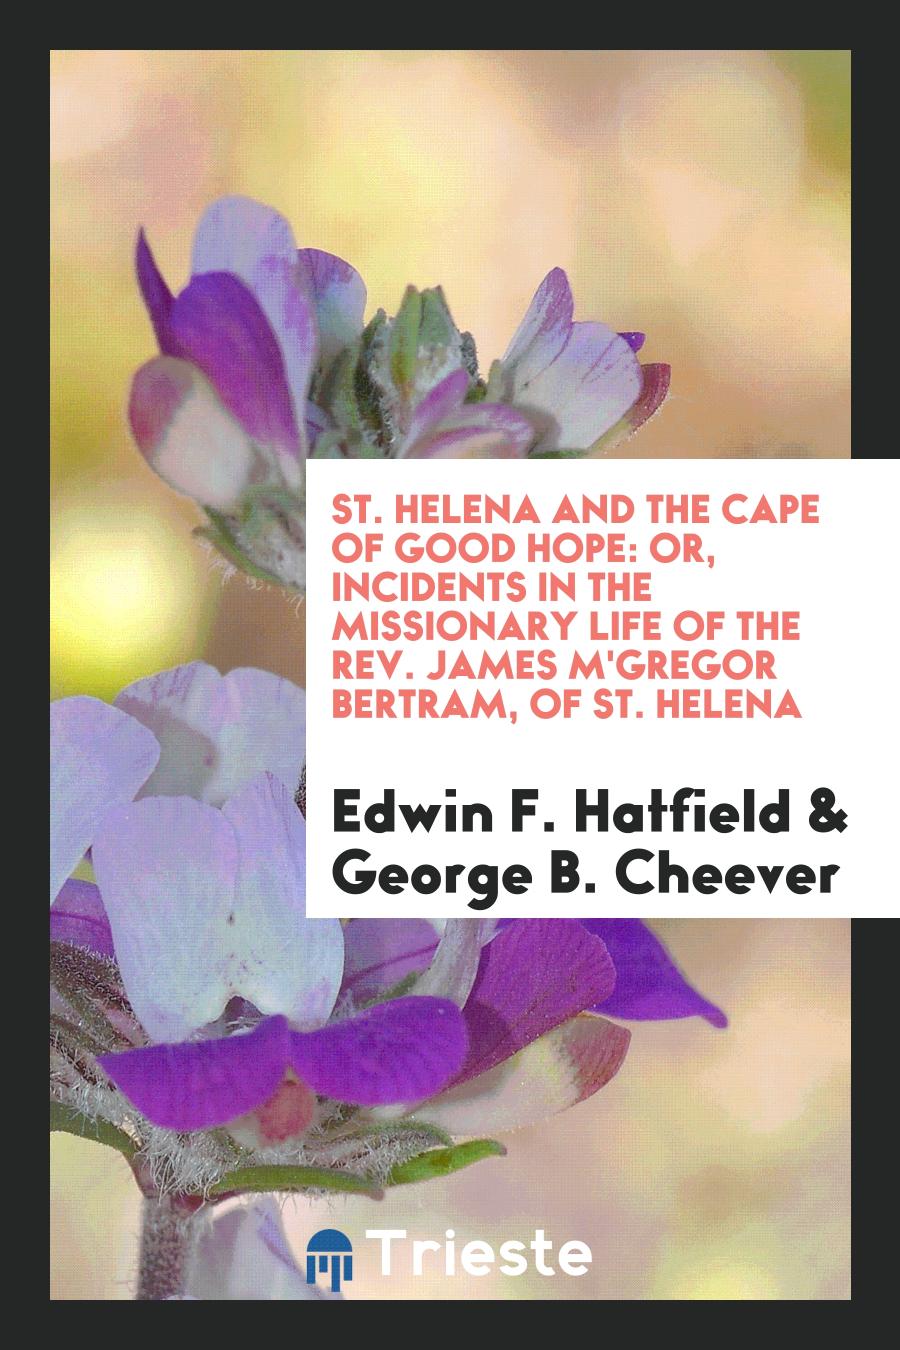 St. Helena and the Cape of Good Hope: Or, Incidents in the Missionary Life of the Rev. James M'Gregor Bertram, of St. Helena